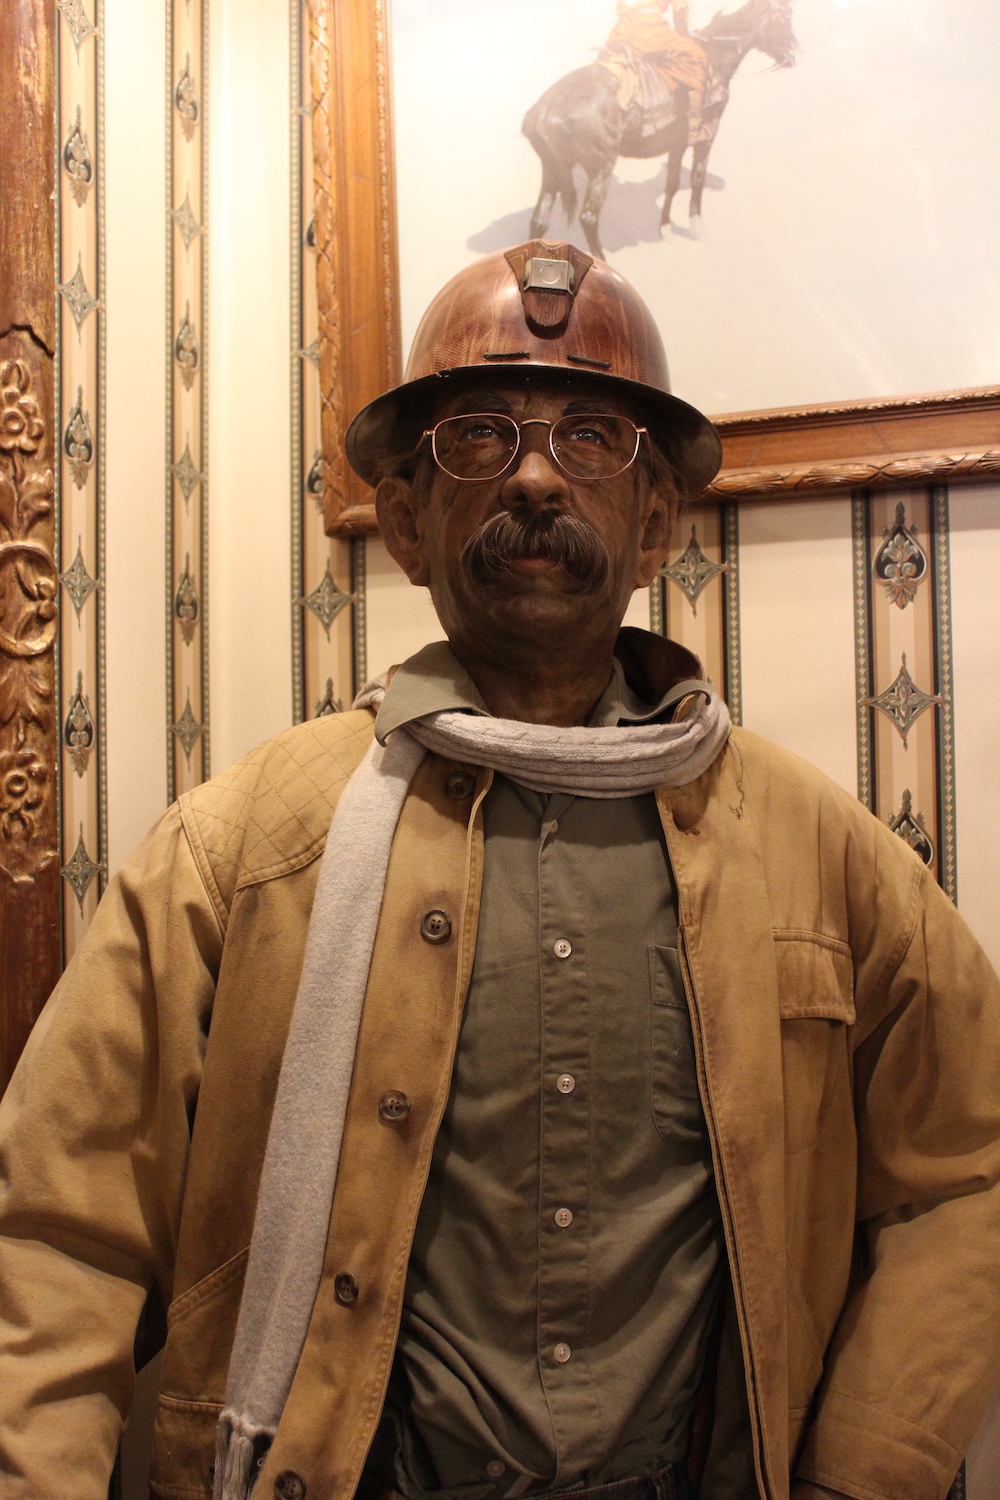 A miner mannequin at the hotel-casino Tonopah Station museum in Nevada